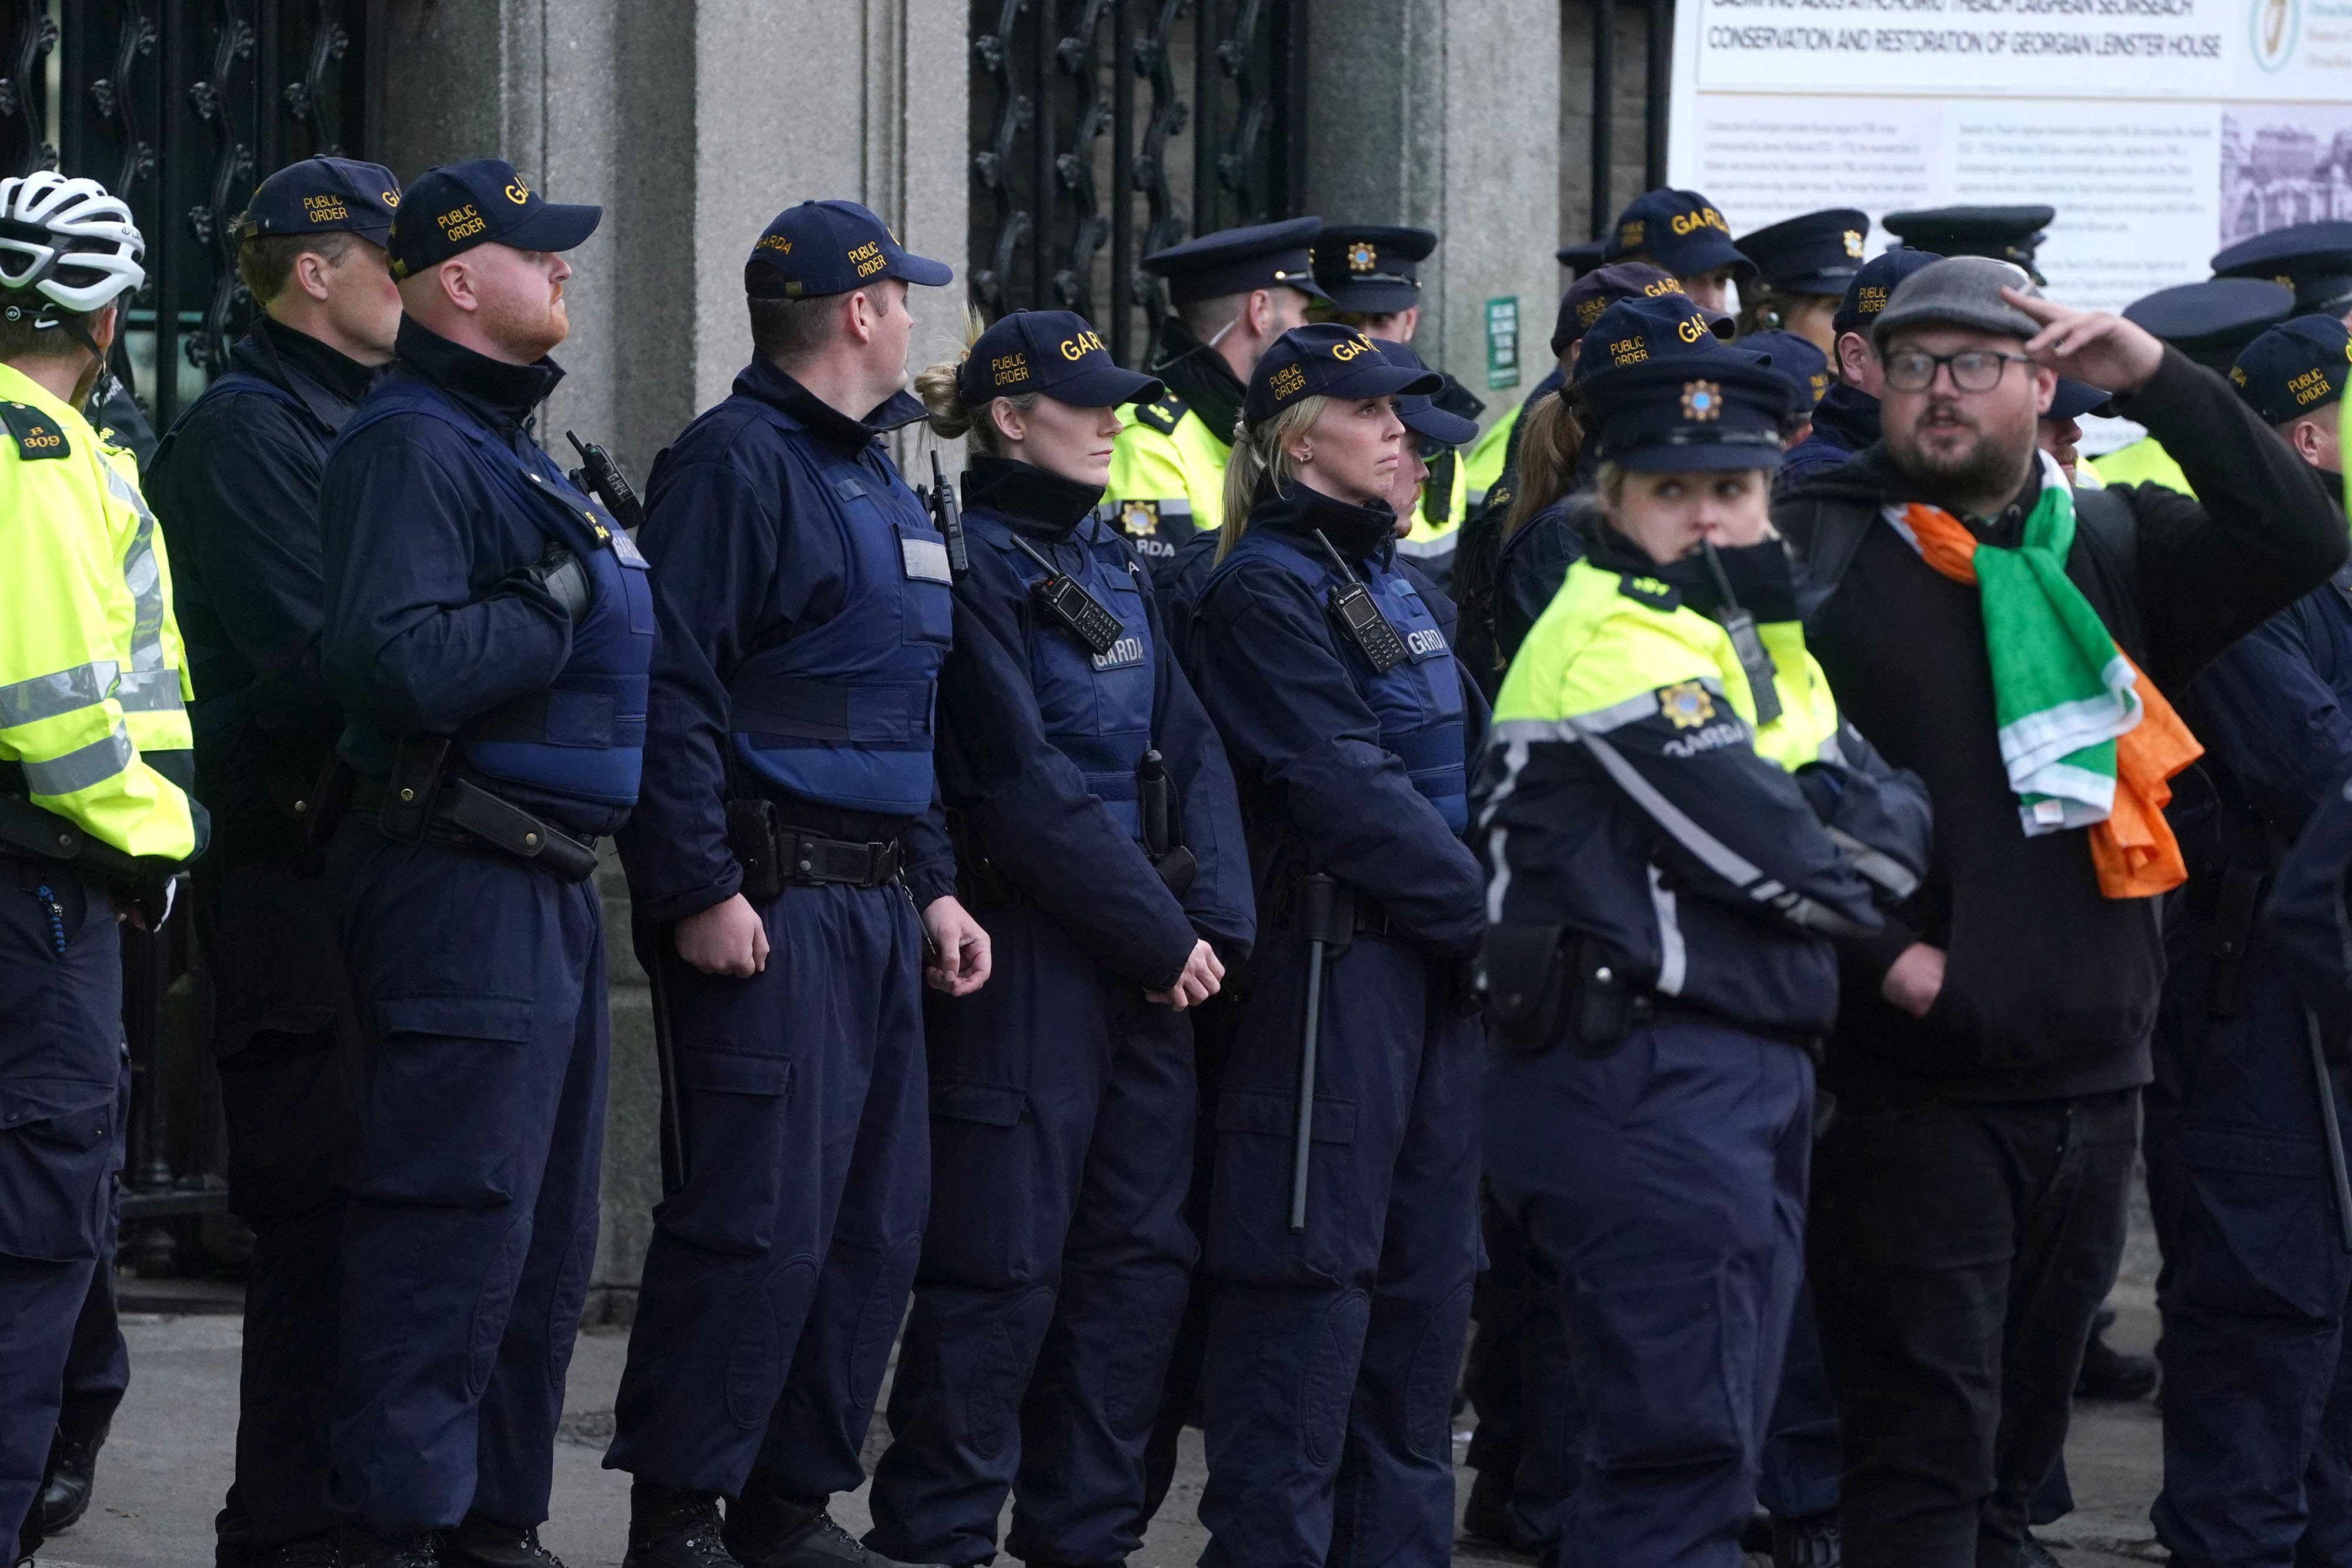 Members of the Garda Public Order Unit watch protesters outside Leinster House (Brian Lawless/PA)